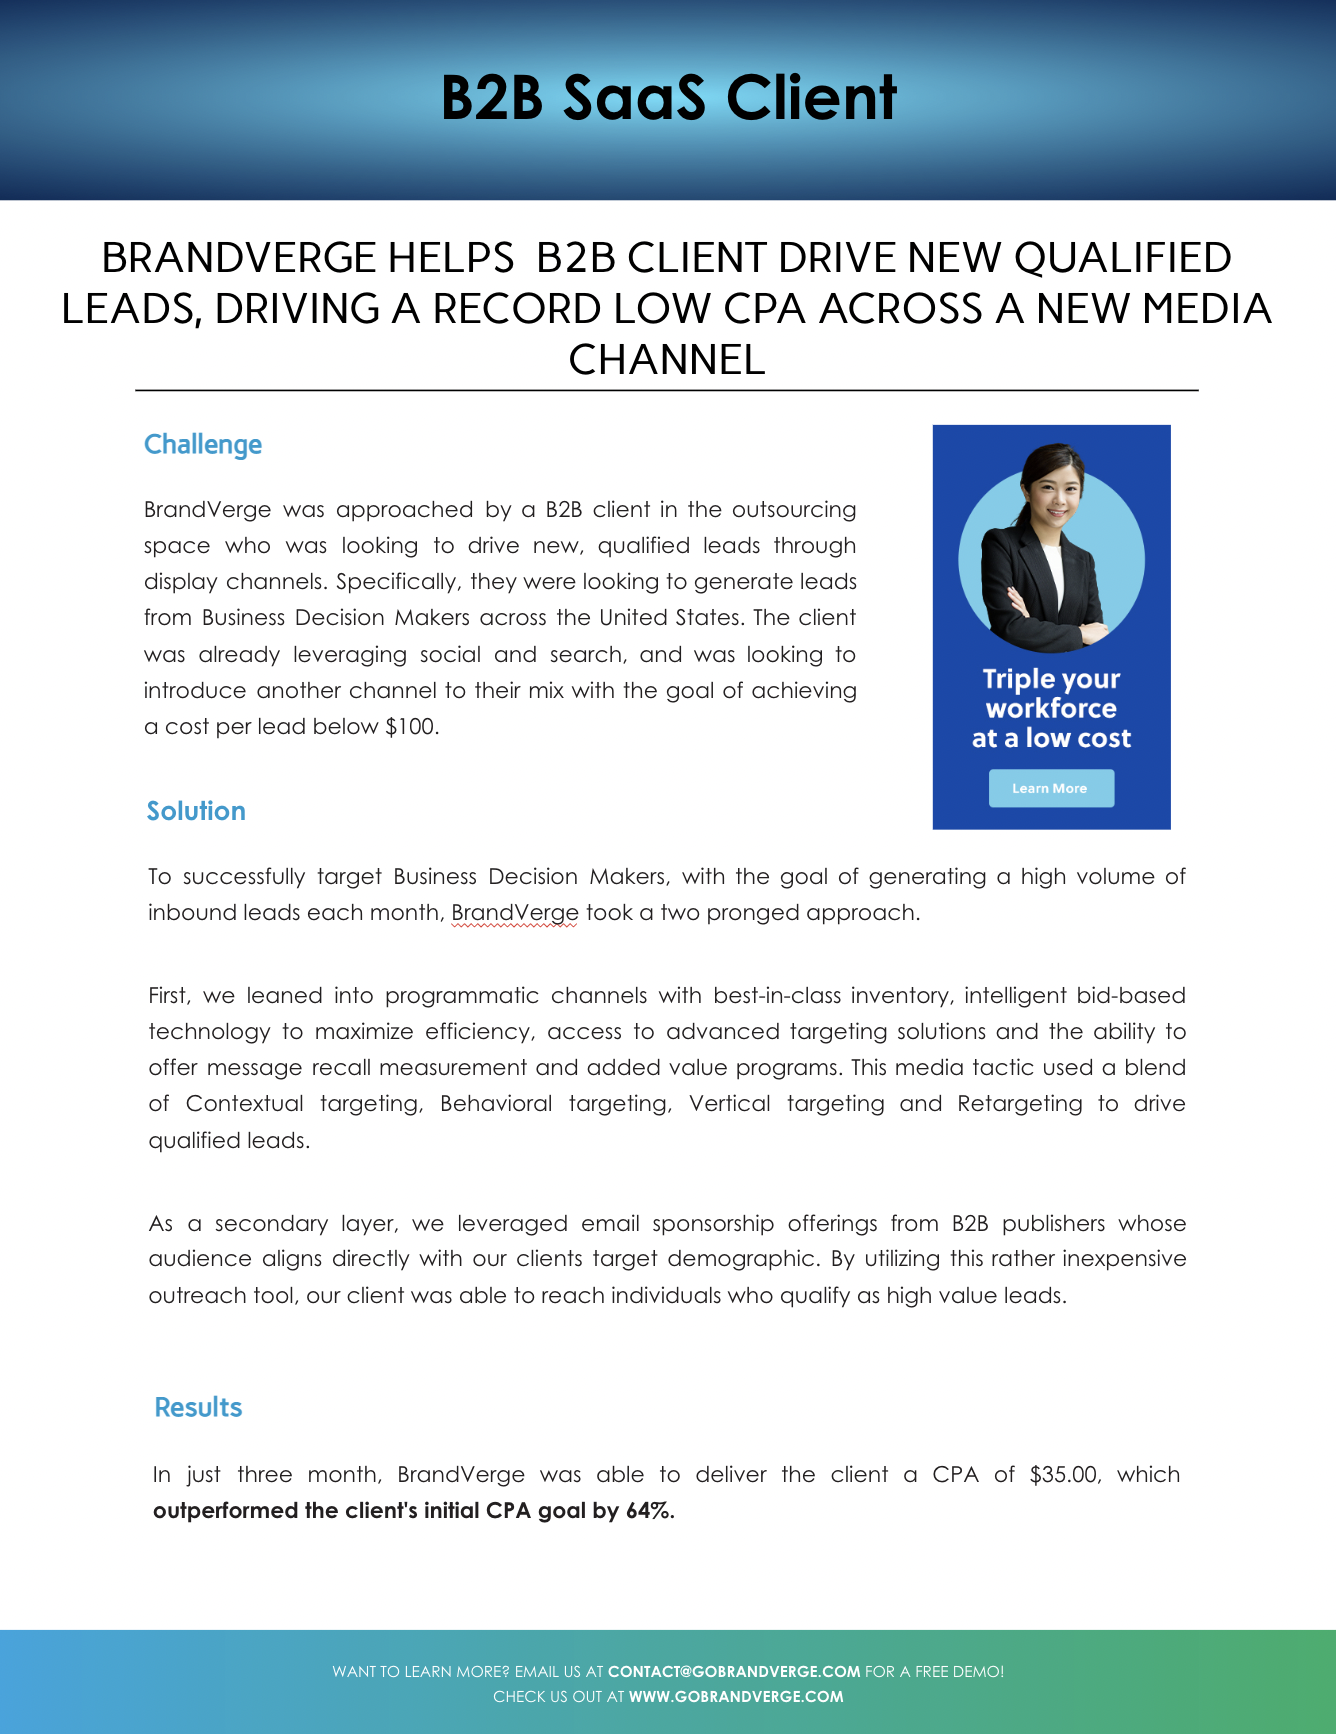 BRANDVERGE HELPS B2B CLIENT DRIVE NEW QUALIFIED LEADS, DRIVING A RECORD LOW CPA ACROSS A NEW MEDIA CHANNEL